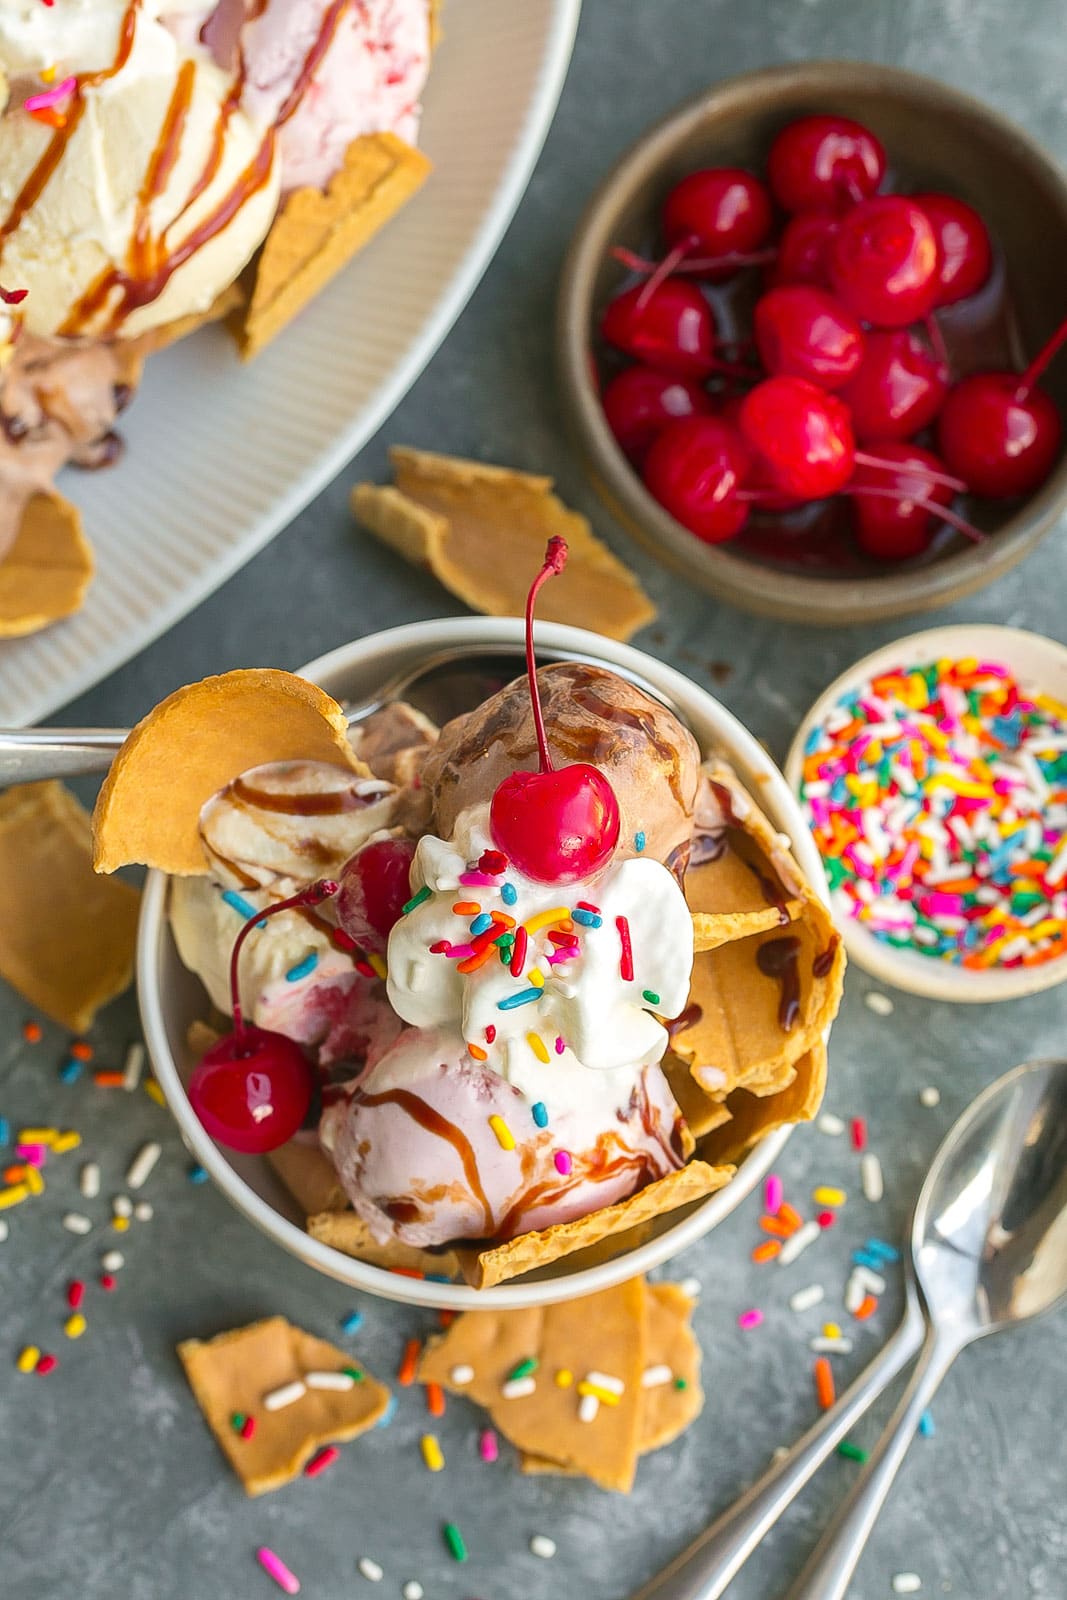 Ice cream and waffle chips in a small bowl.